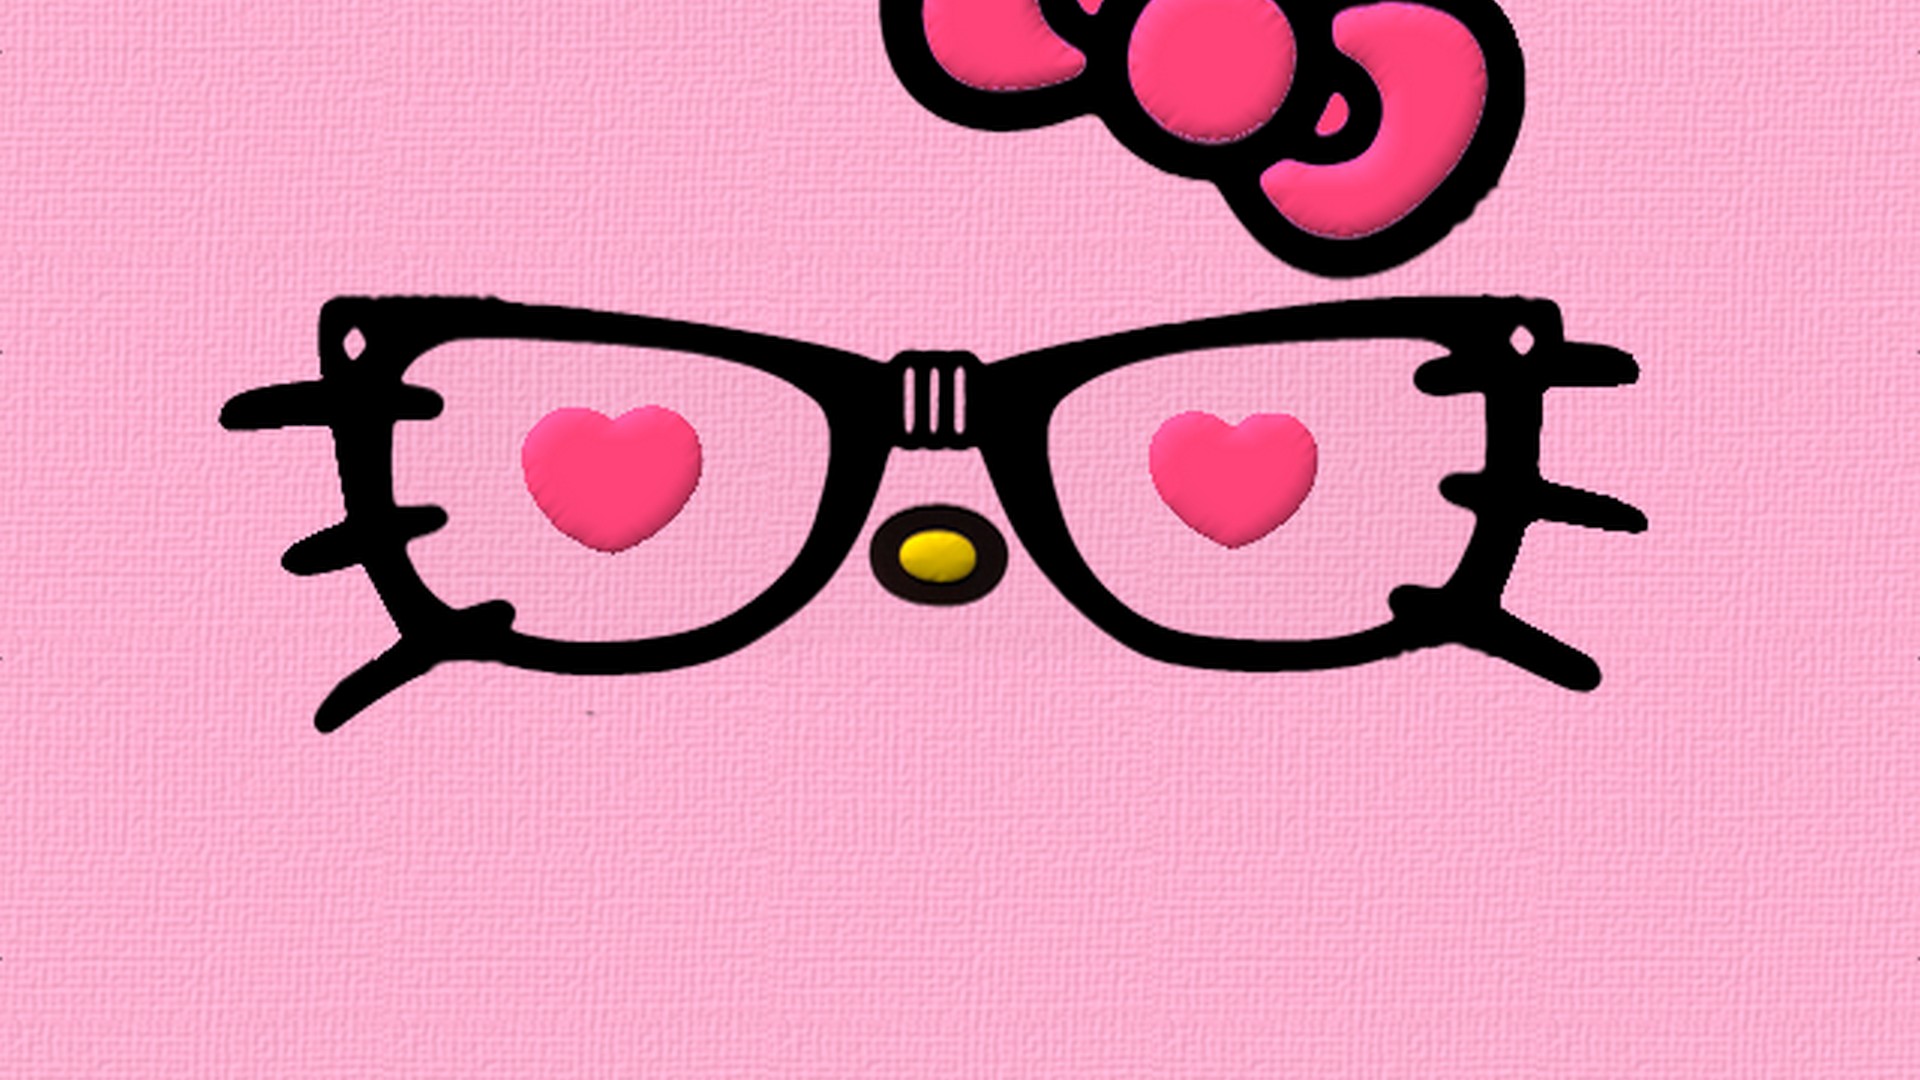 Sanrio Hello Kitty Wallpaper For Desktop with resolution 1920X1080 pixel. You can use this wallpaper as background for your desktop Computer Screensavers, Android or iPhone smartphones